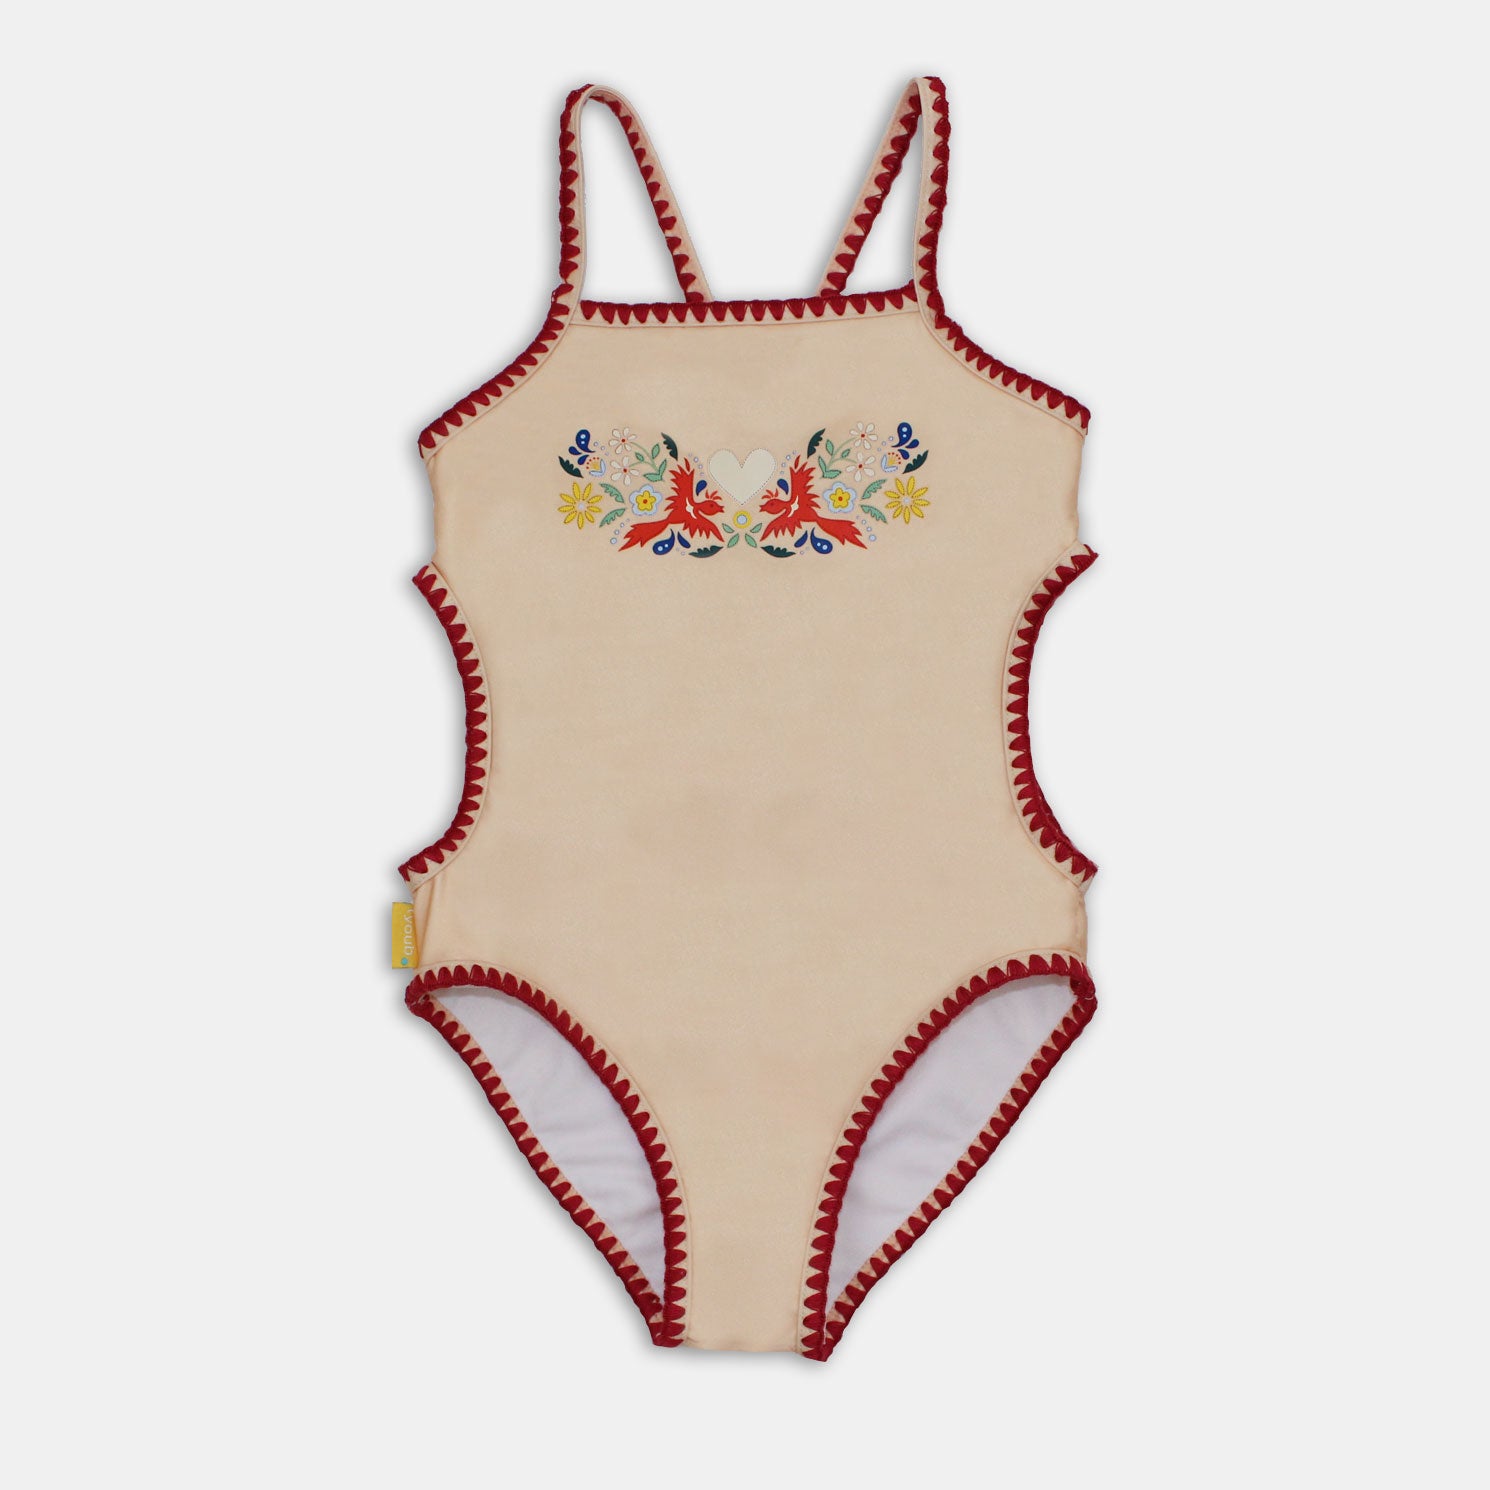 Girl’s cut-out swimsuit, one piece with decorative heart print on front. Embroidered stitching on edges and straps. Made from recycled polyester. UPF 50+ sun protection and fully lined.